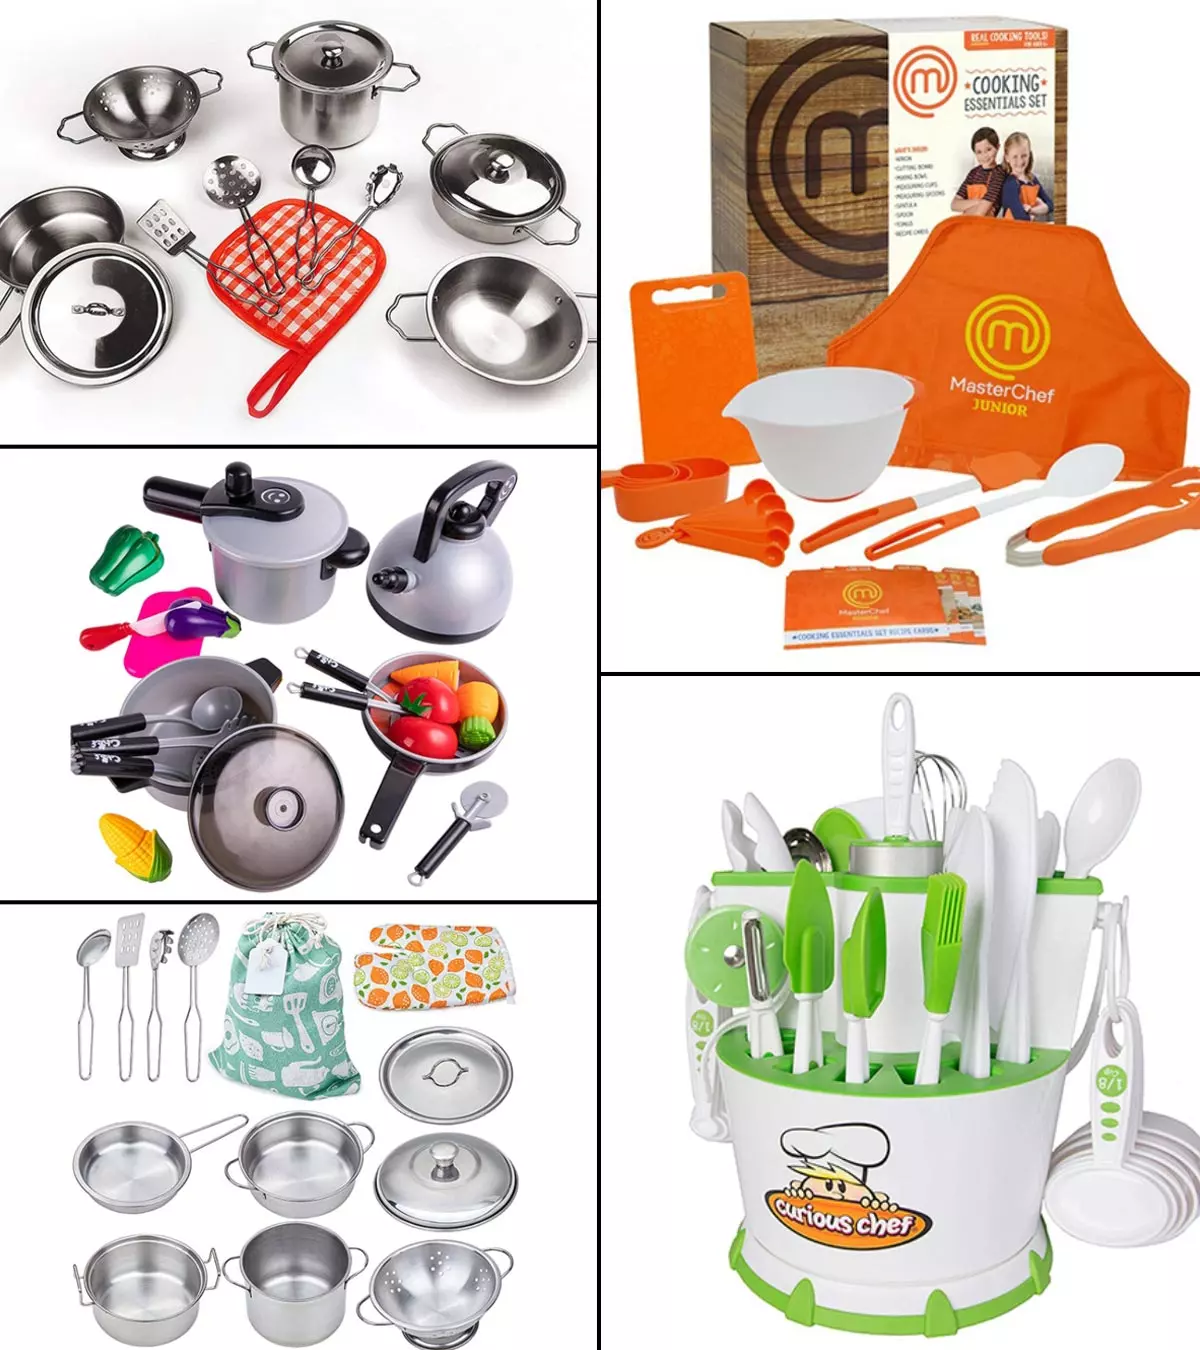 13 Best Cooking Kits